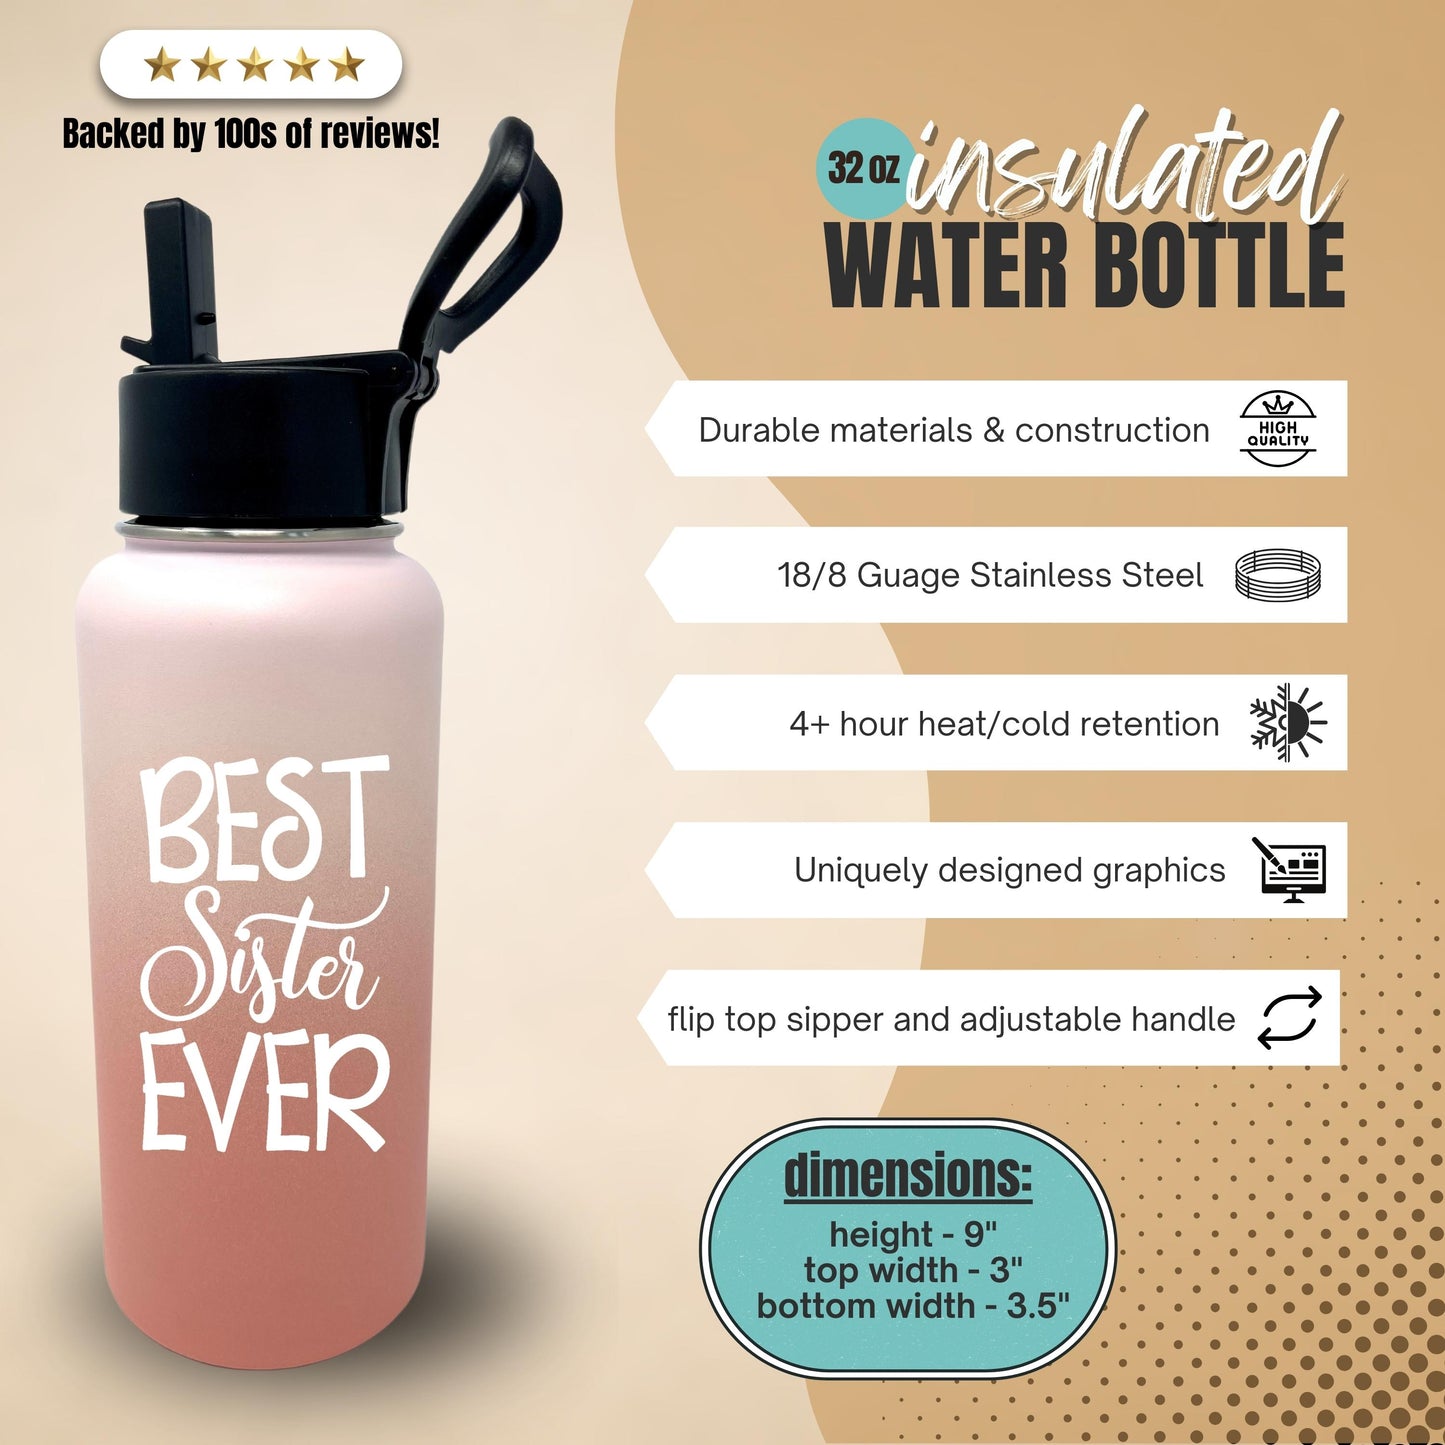 Brooke and Jess Designs Sister Gift Box - Best Sister Ever Tessa, 32 oz Tumbler Waterbottle, and Keychain Gift Box Set